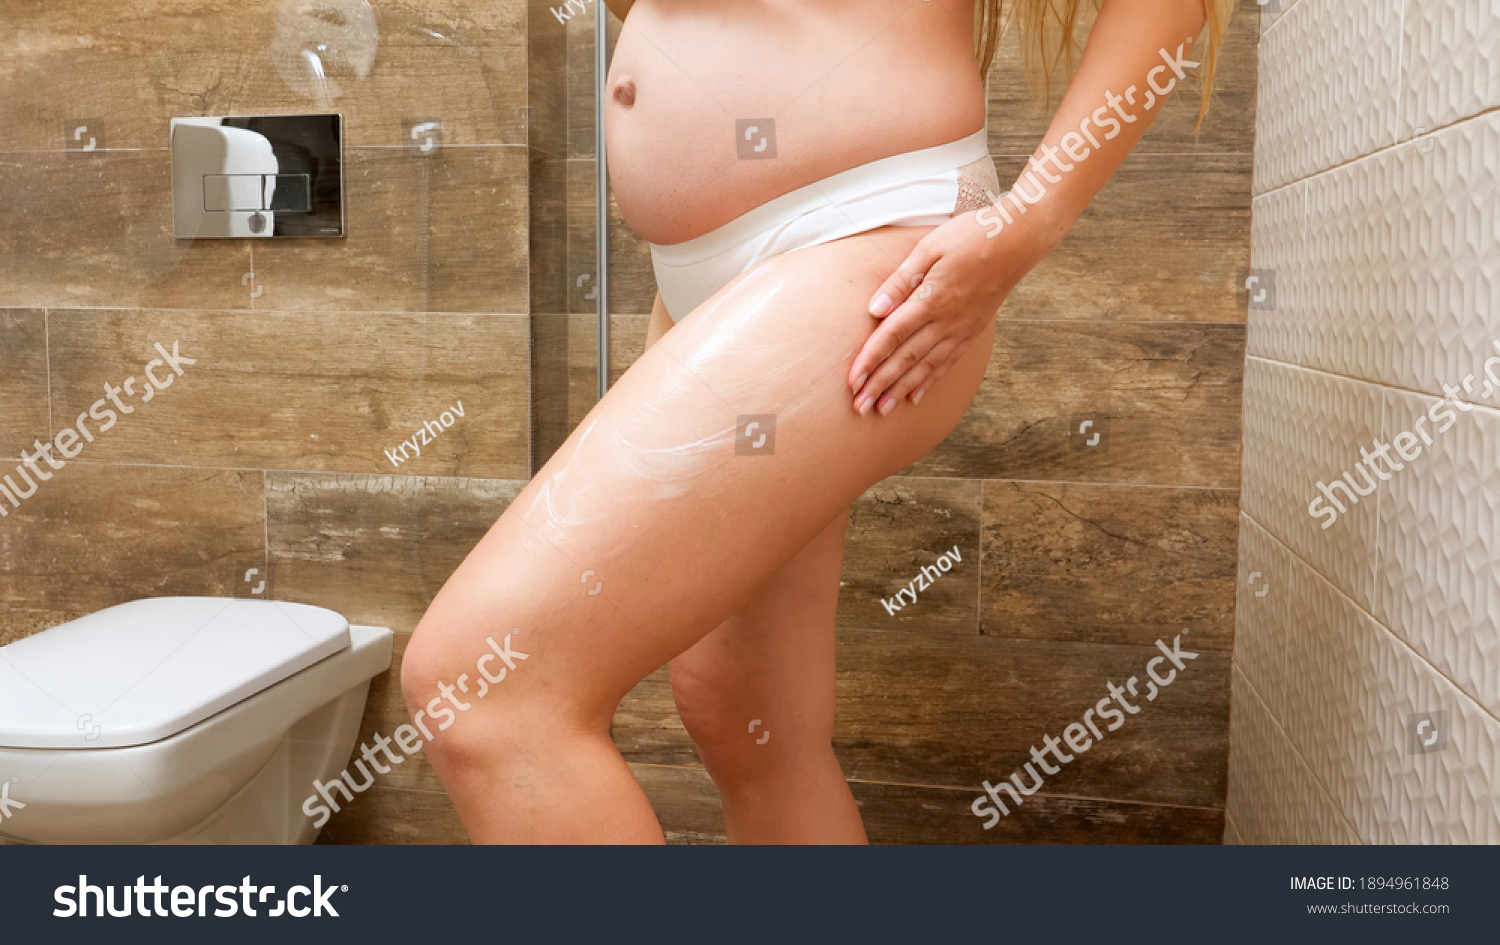 Young chick with pretty butt pissing in the toilet